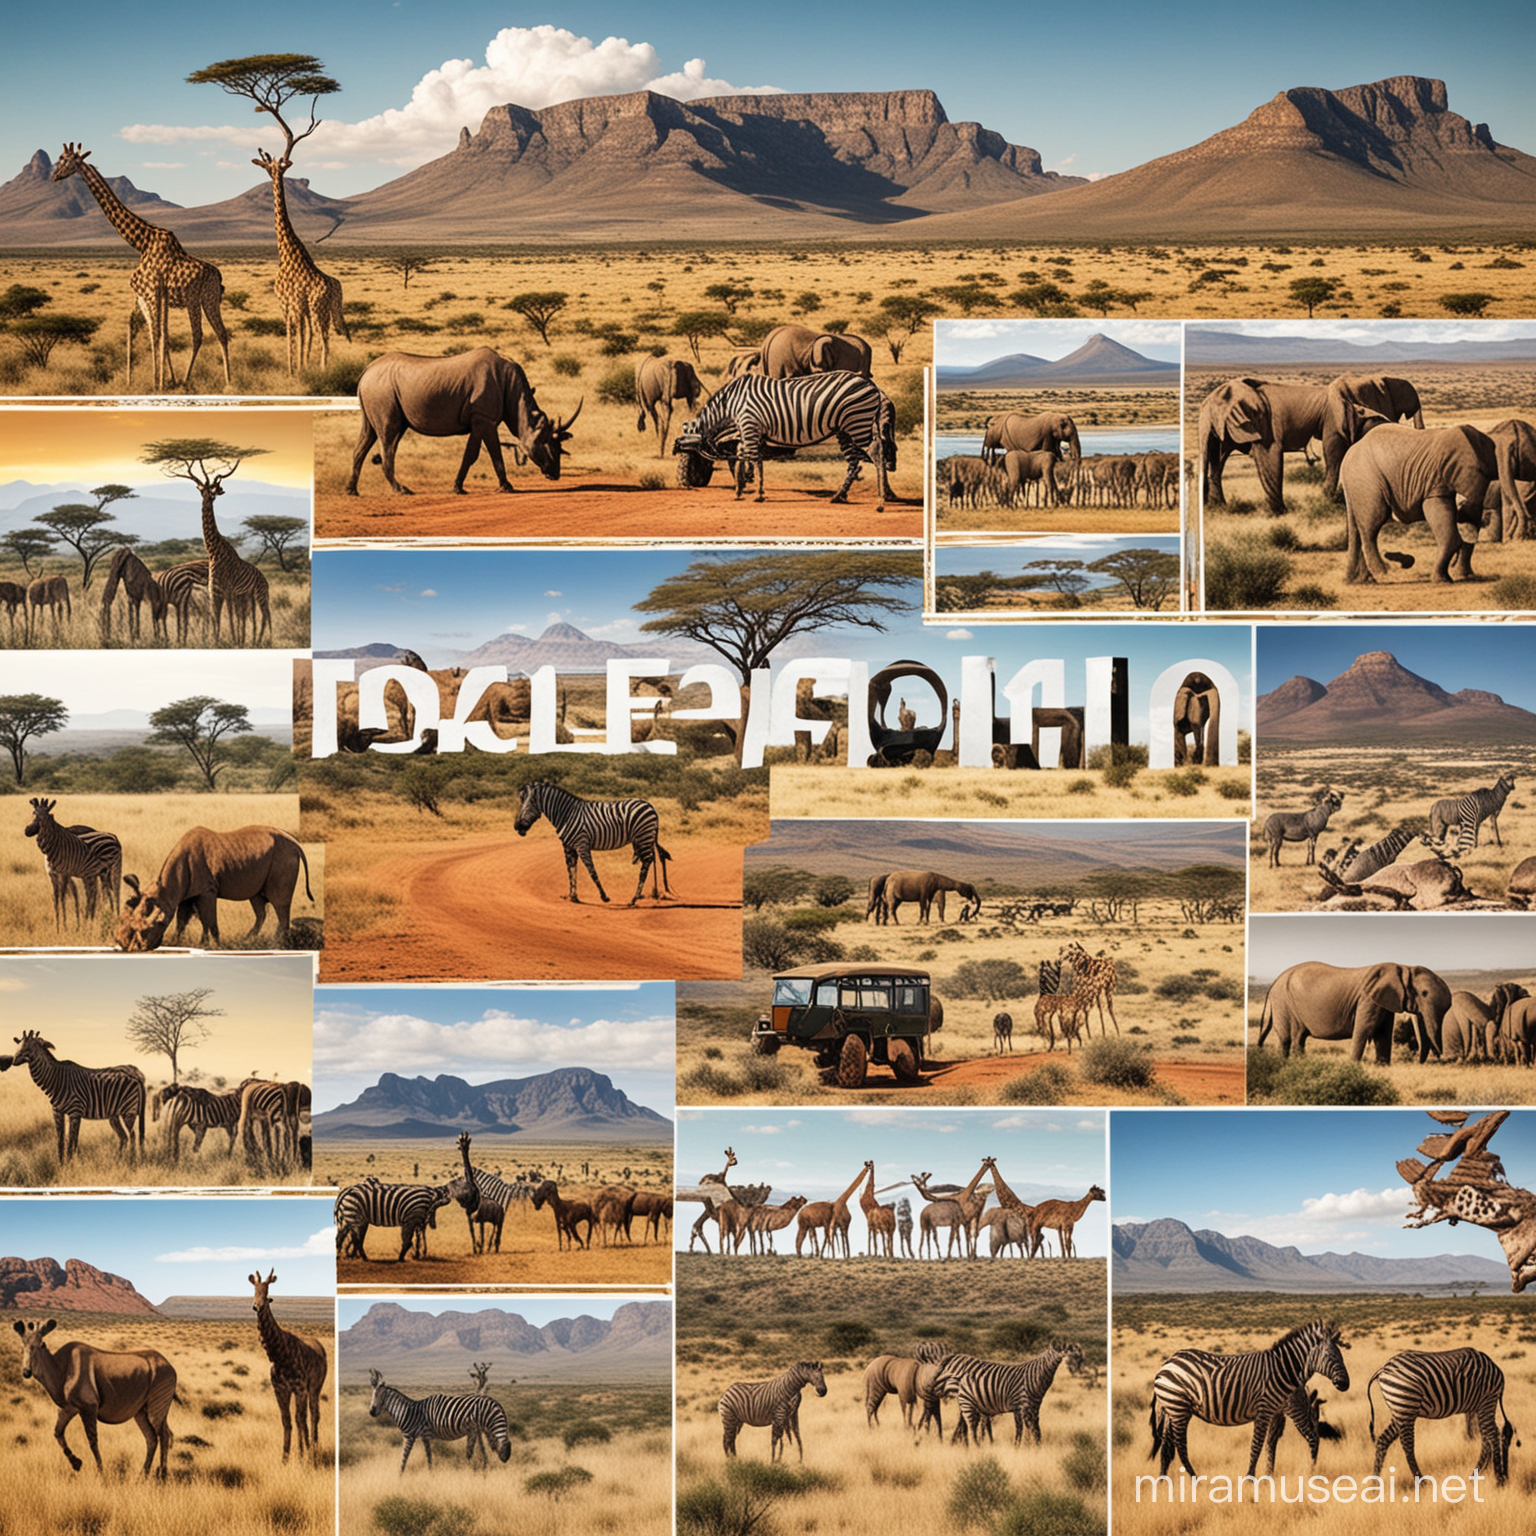 Please create a impressive picture collage from South Africa to animate travellers to travel to South Africa.